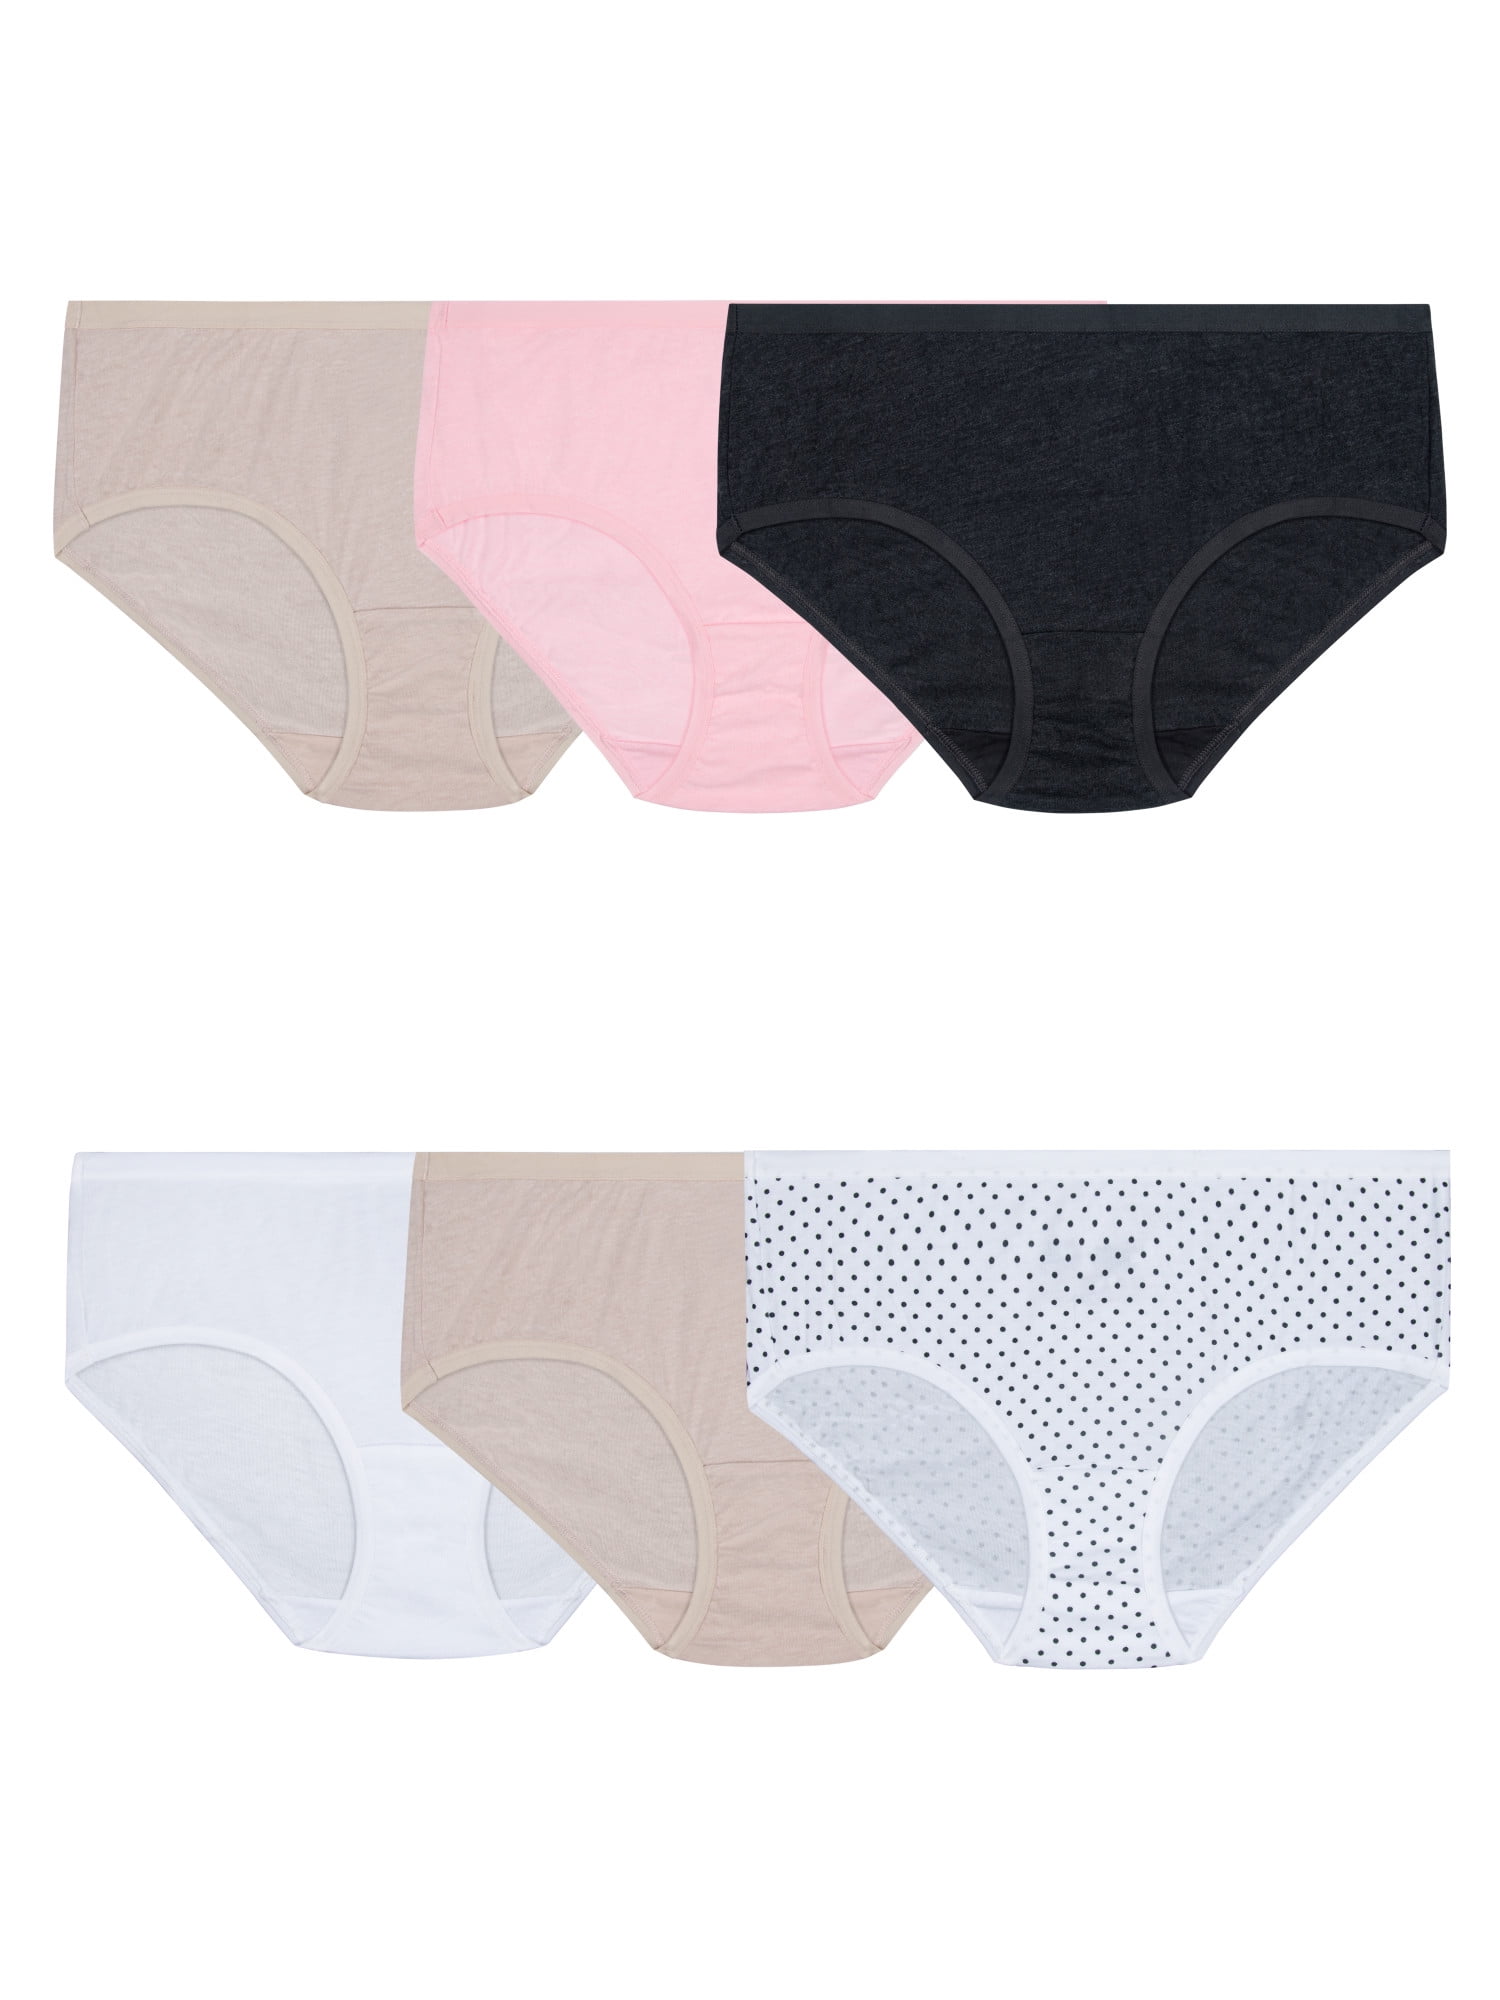 Fruit of the Loom Women's Premium Ultra Soft Brief Panty, 6 Pack, Sizes 6-10